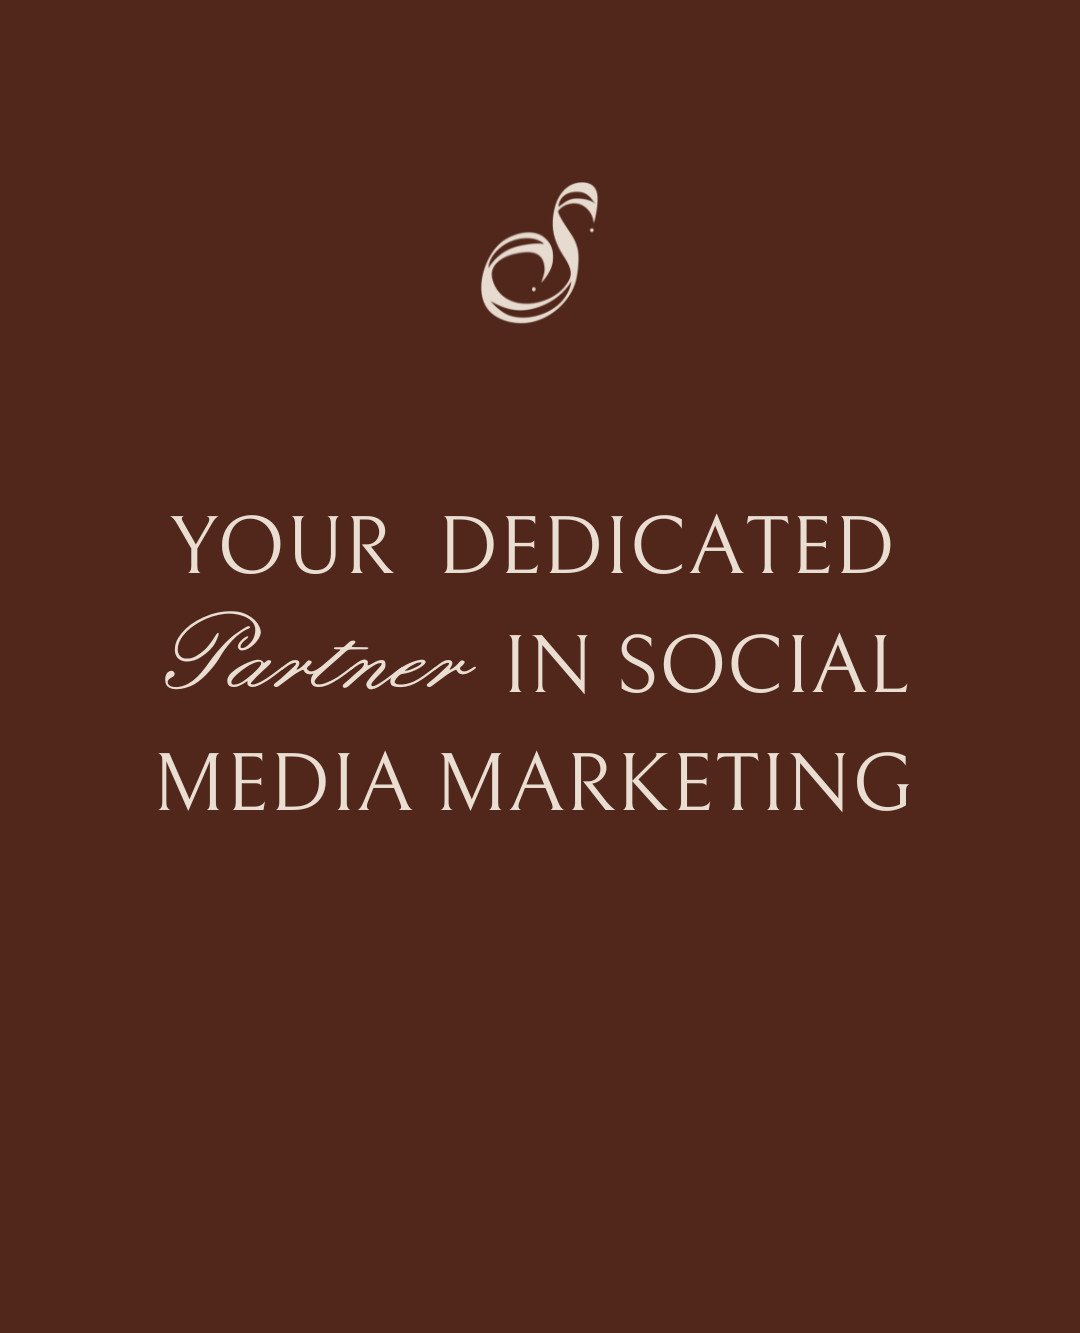 Our mission is simple: To partner with businesses that are fueled by creativity and help them build an engaging, authentic, and growth-oriented social media presence.

#socialmediapartner #SocialMediaMarketing